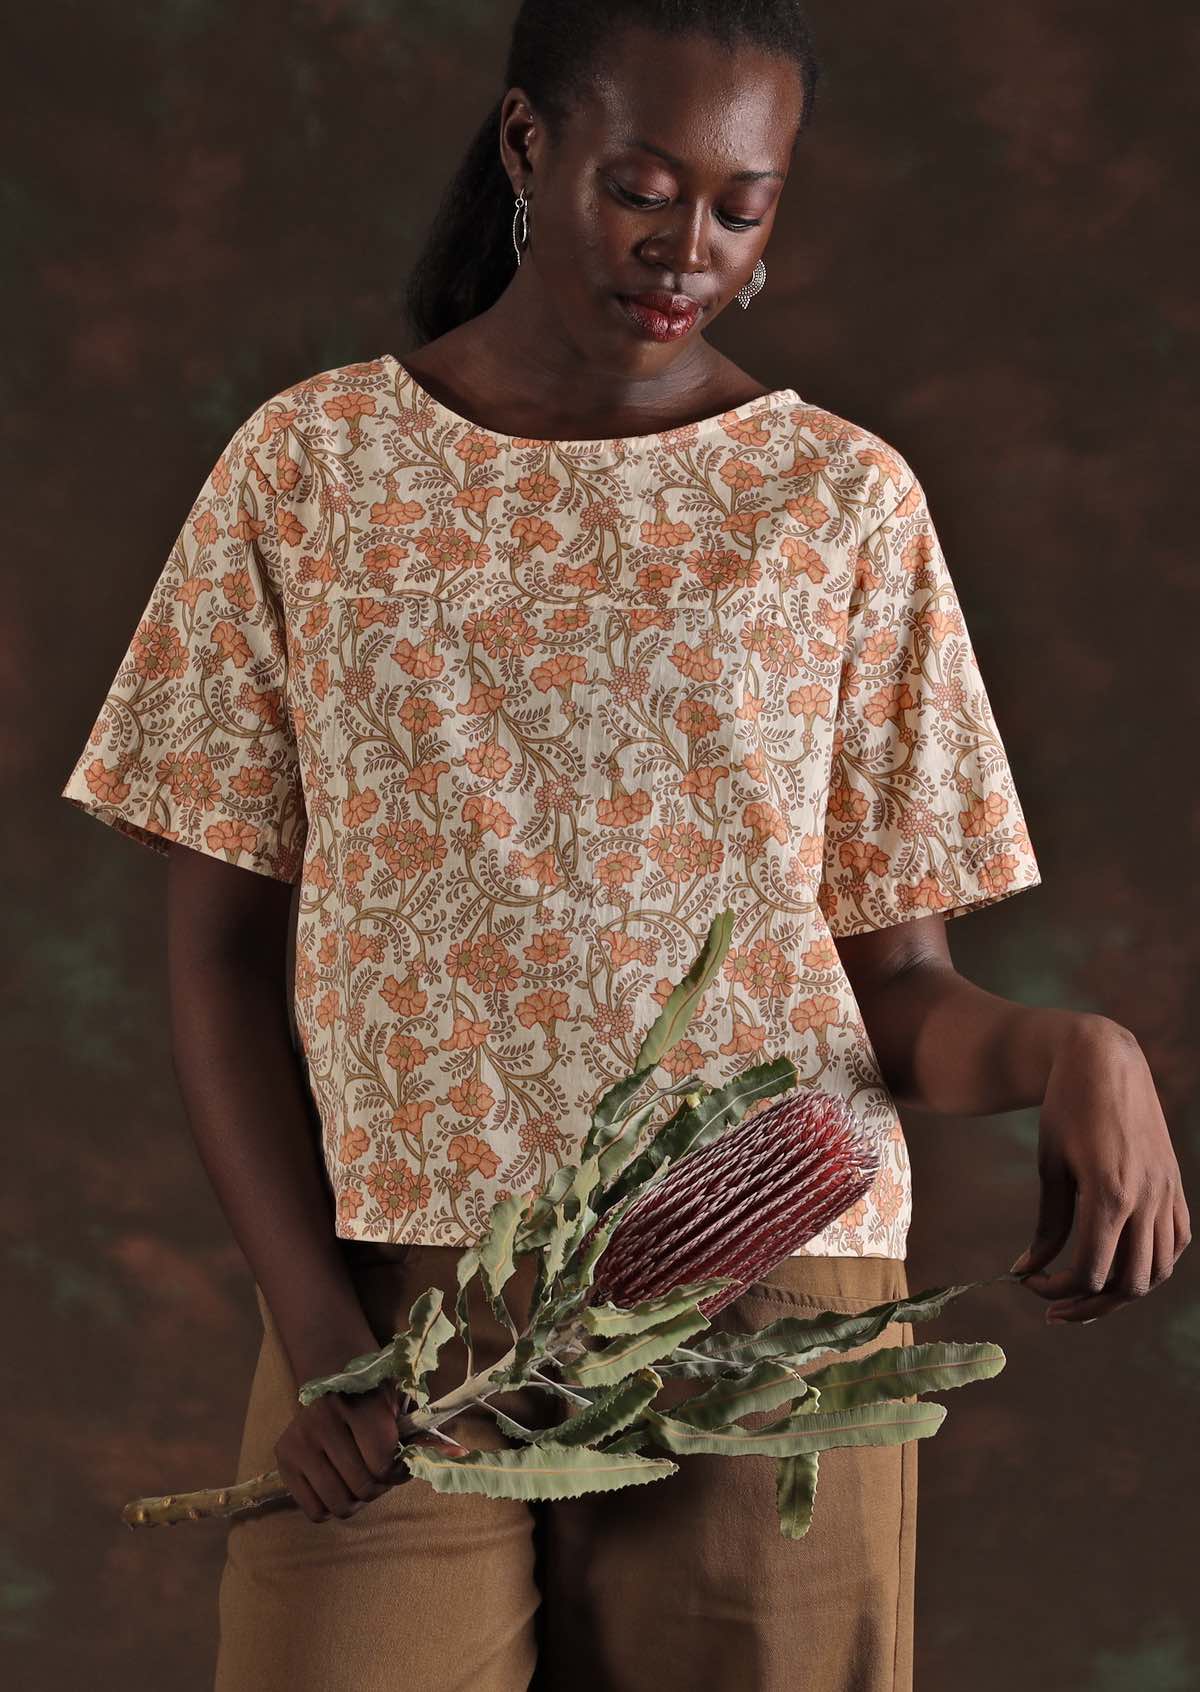 Model wears cotton floral short sleeve top holding a banksia flower